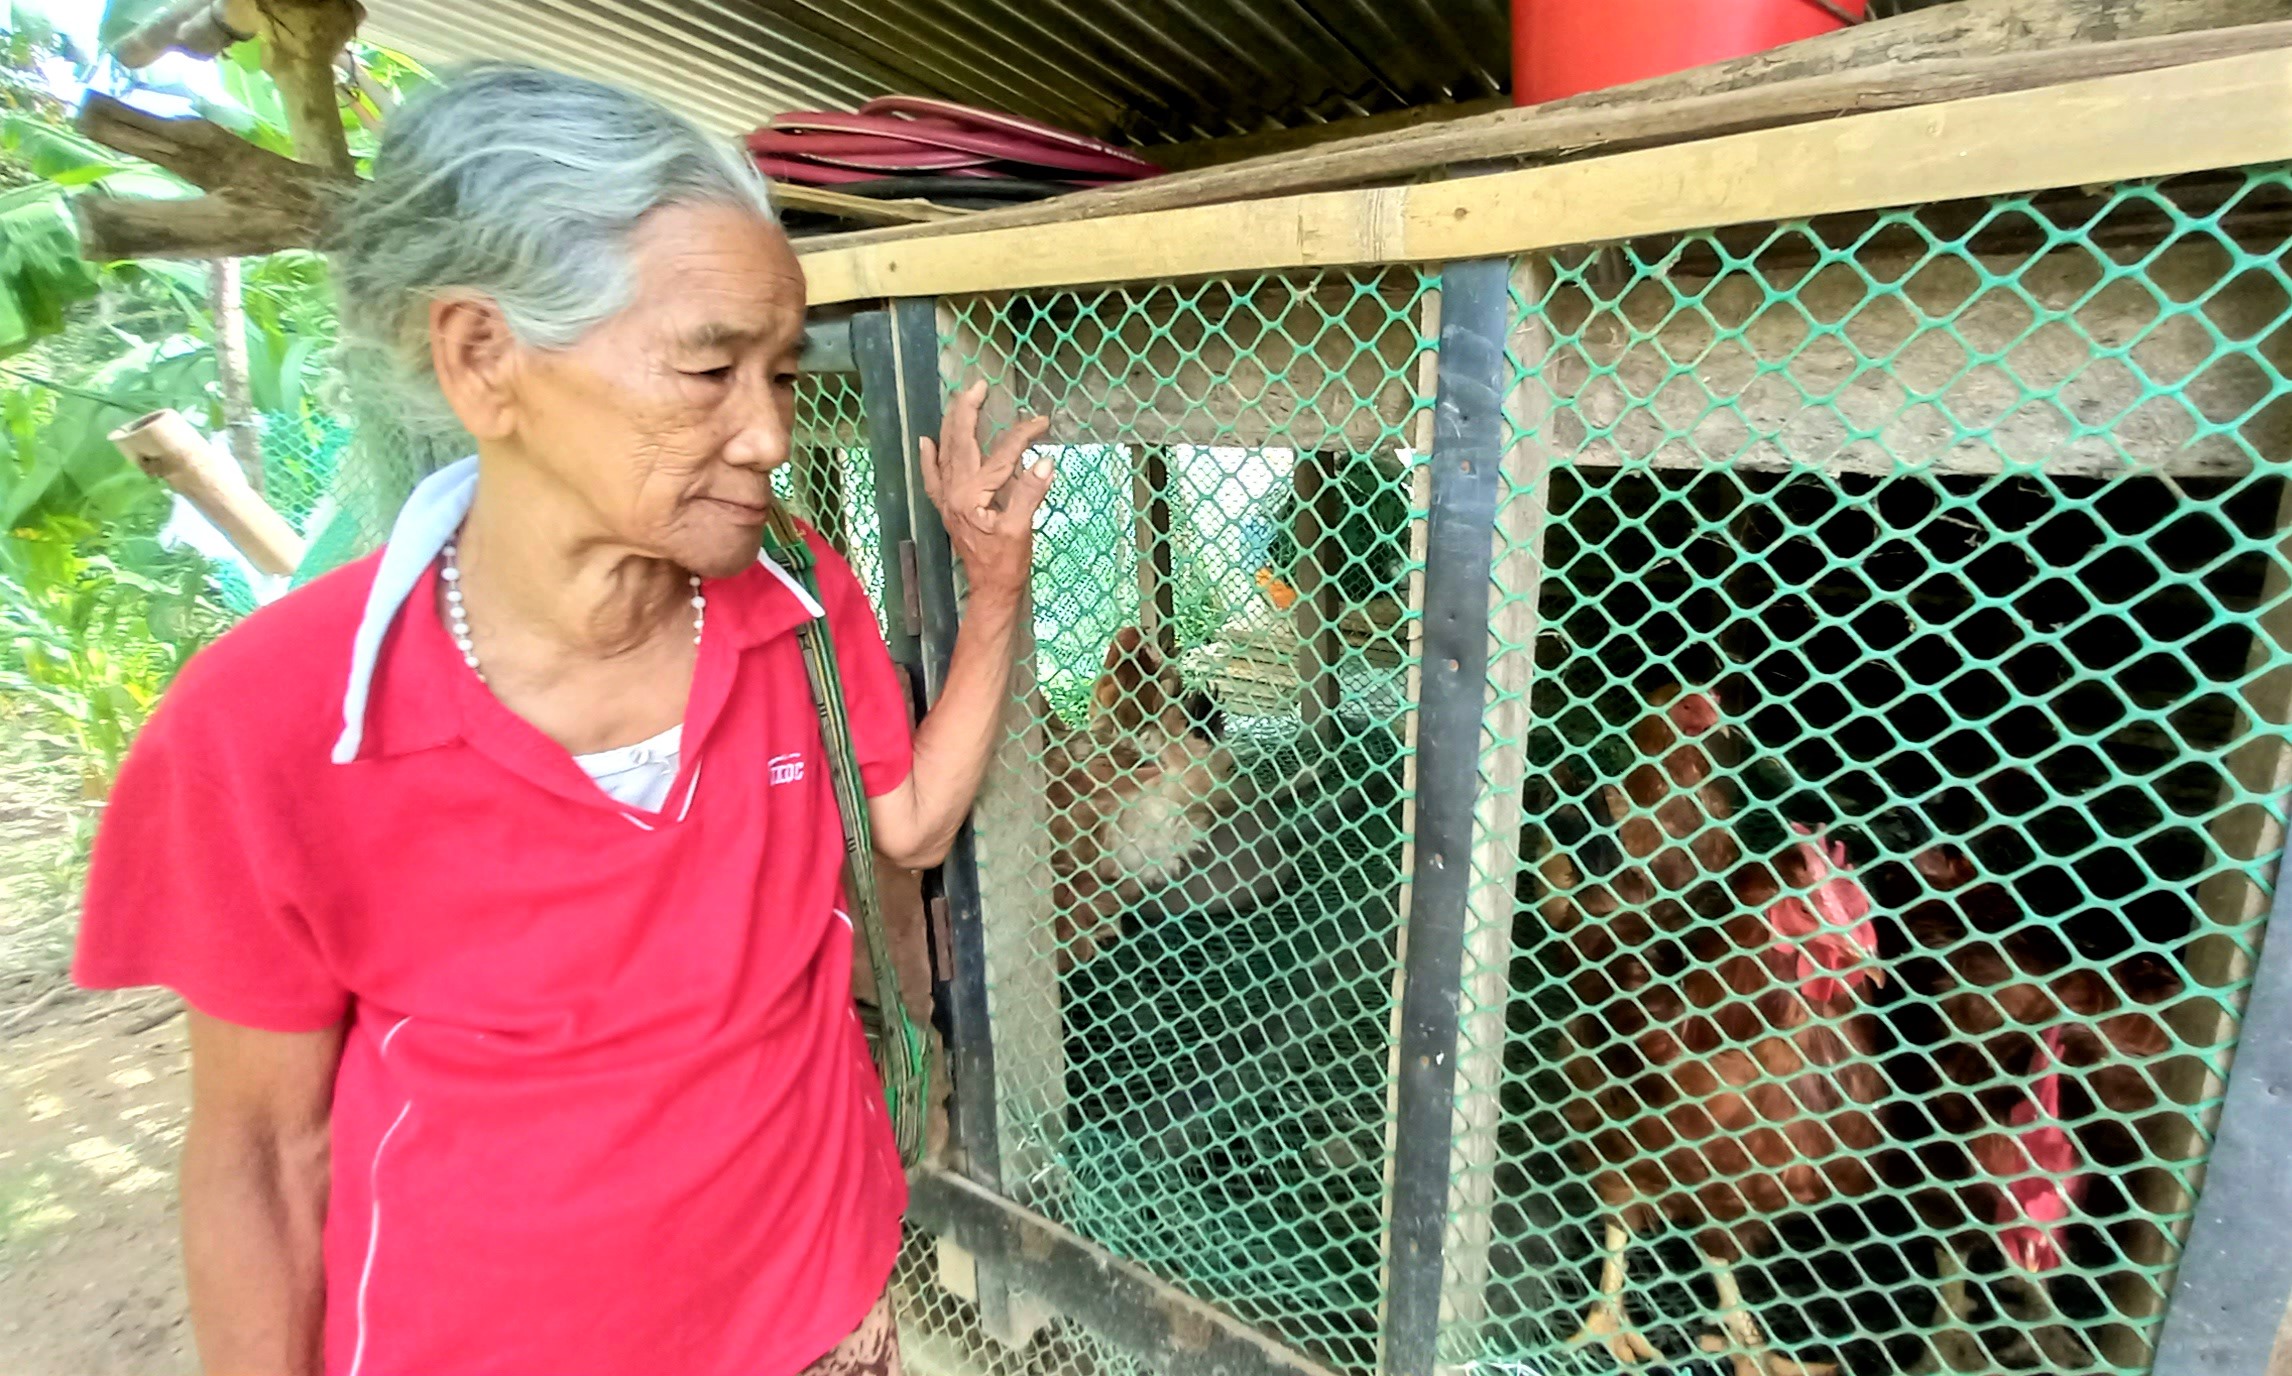 76-year-old woman-farmer contributes through community food and seed system